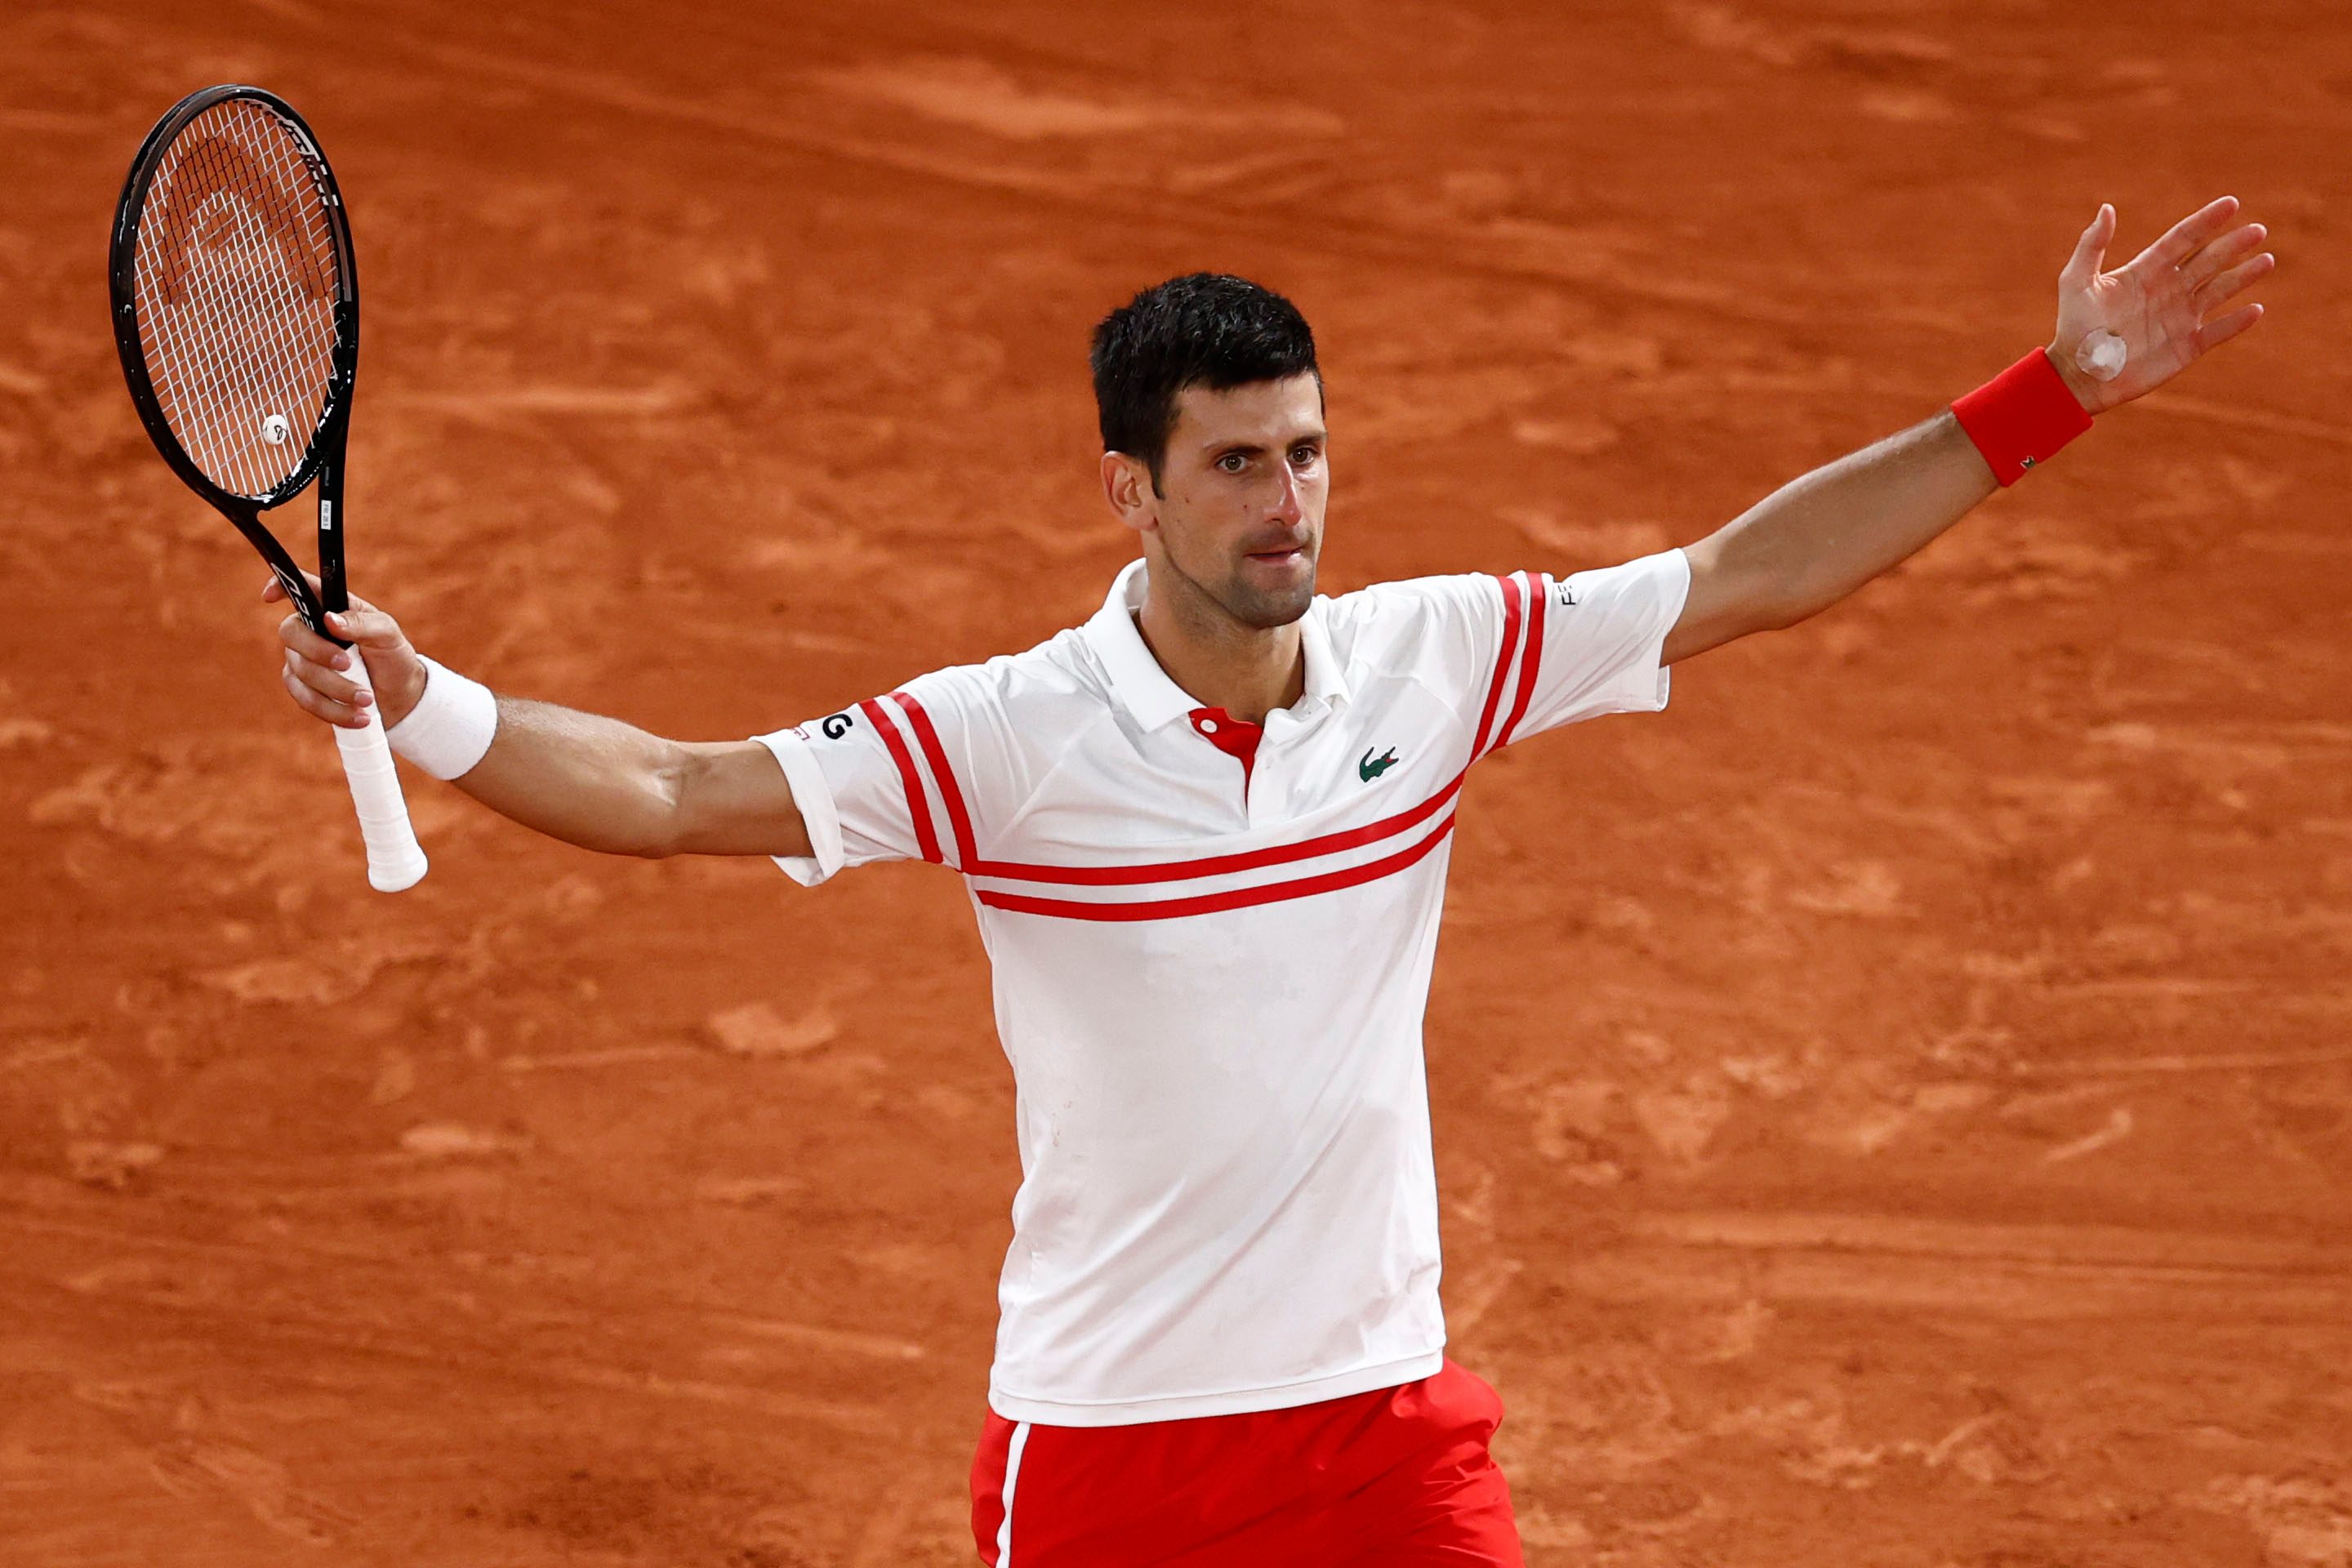 Djokovic topples Nadal in French Open match to ‘remember forever’